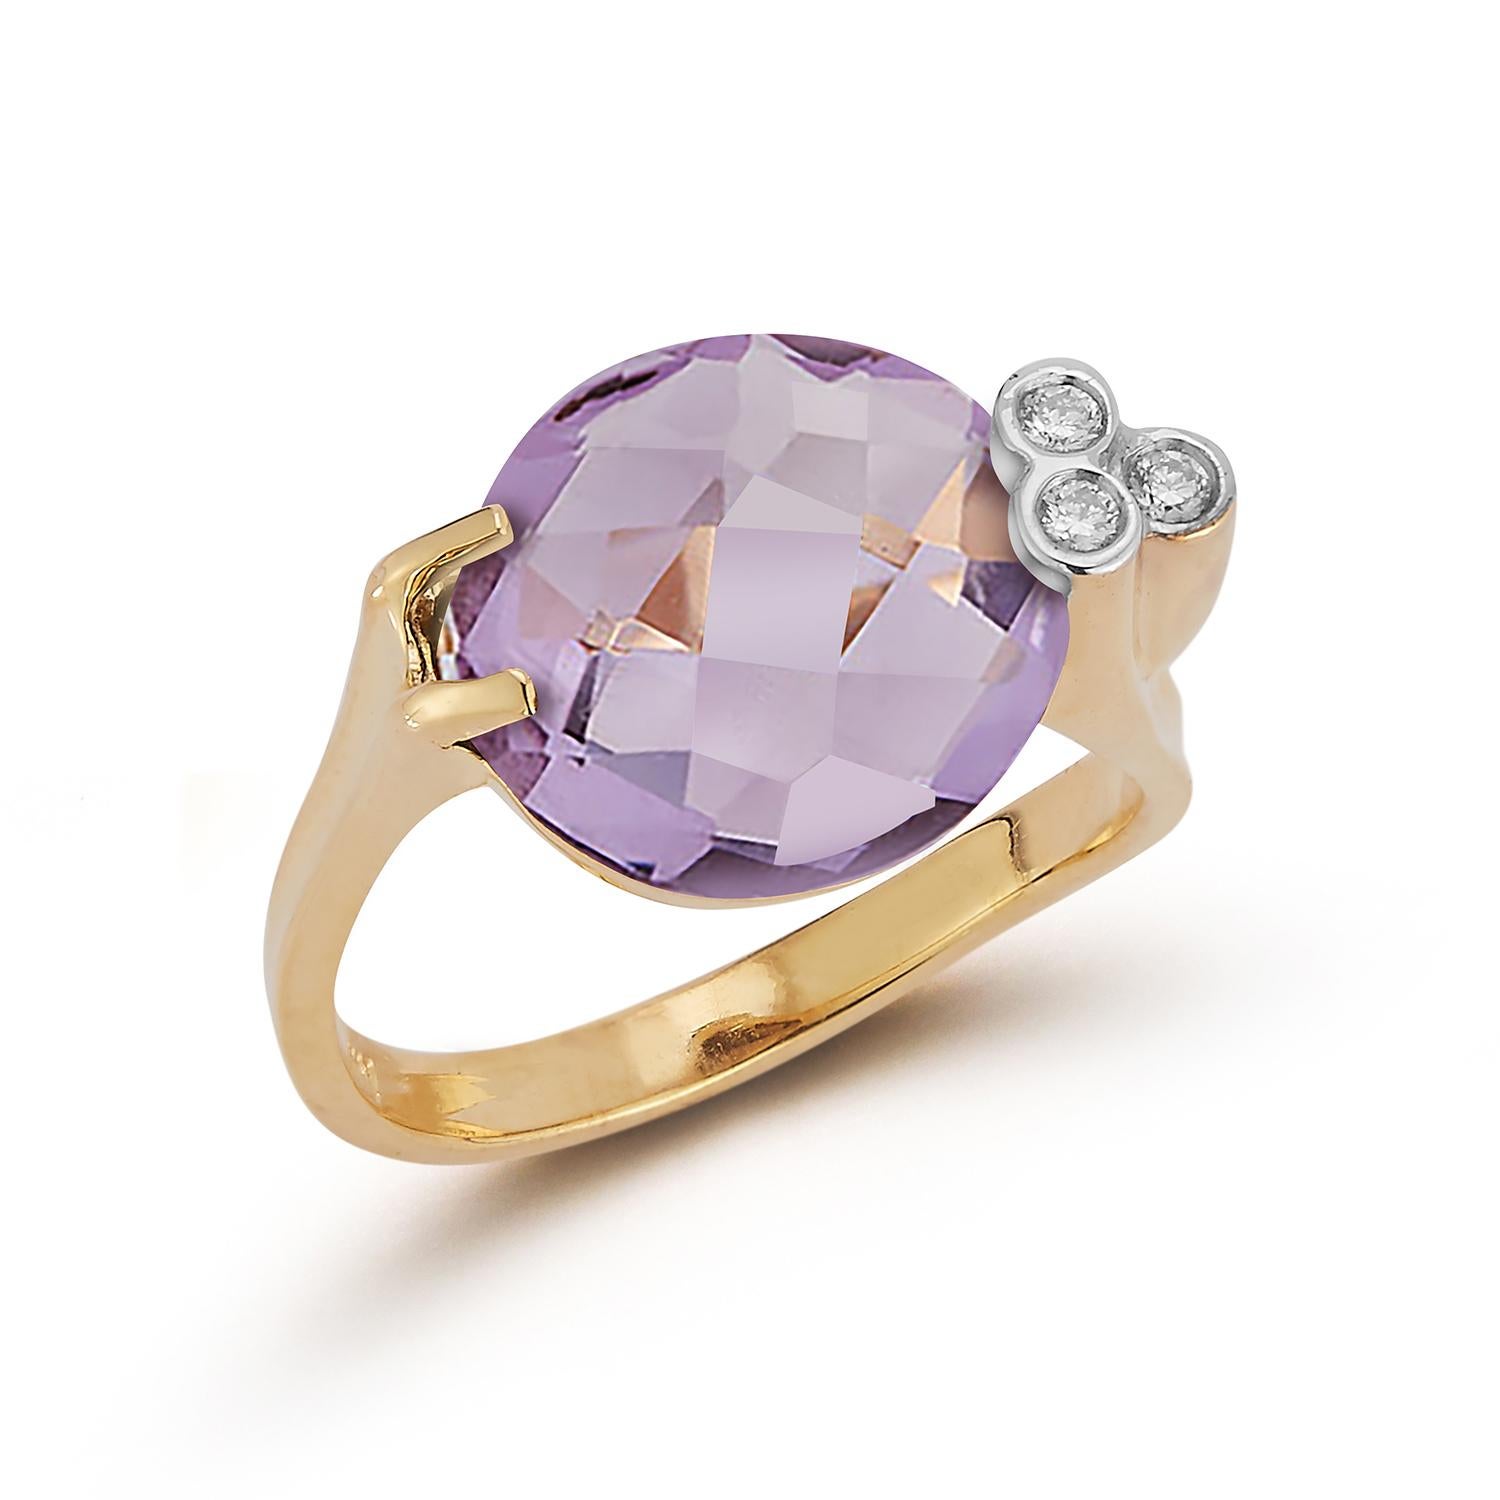 For Sale:  Hand-Crafted 14 Karat Yellow Gold Amethyst Color Stone Cocktail Ring 4